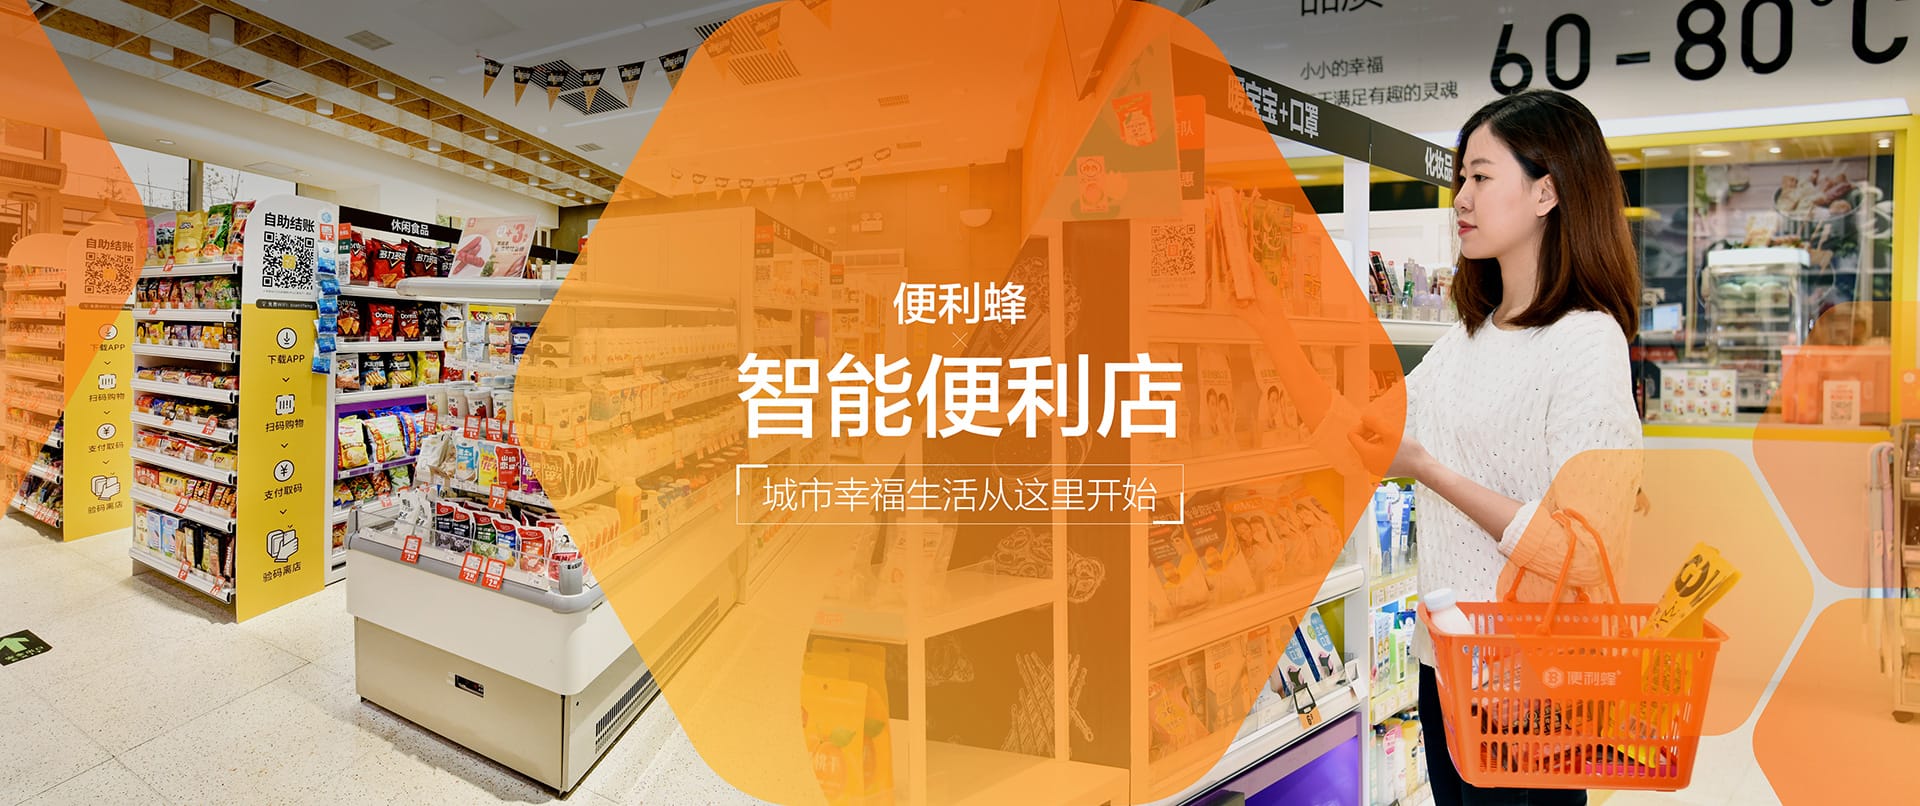 With US$256 million from Tencent & Hillhouse Capital, New Retail convenience store BianLiFeng launches food delivery service